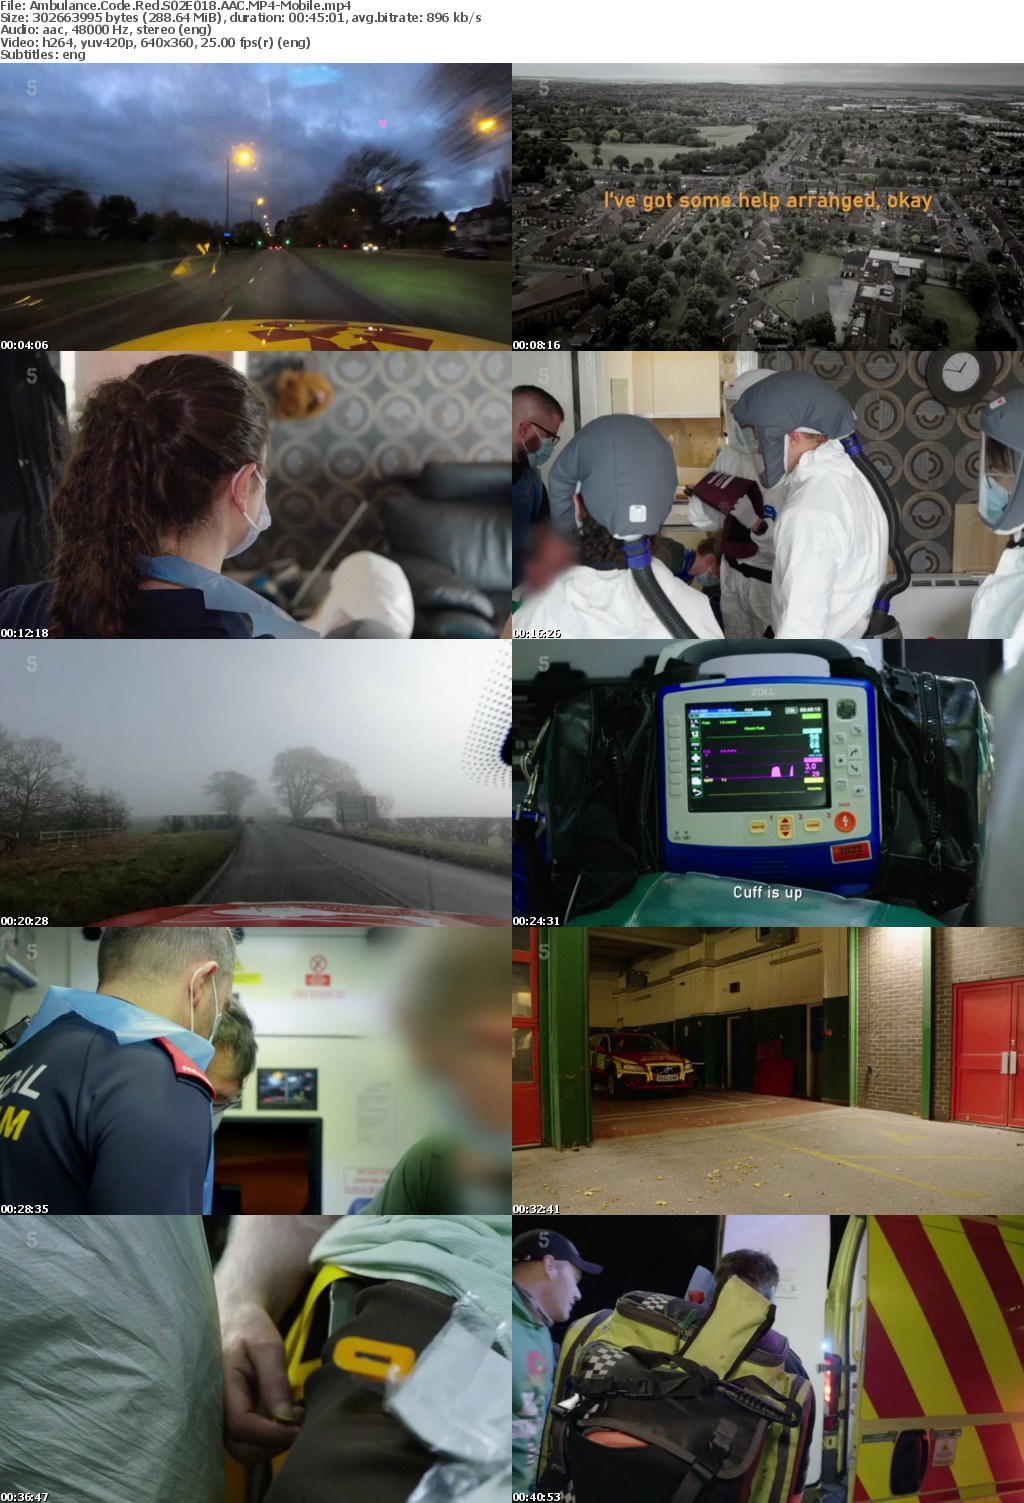 Ambulance Code Red S02E018 AAC MP4-Mobile